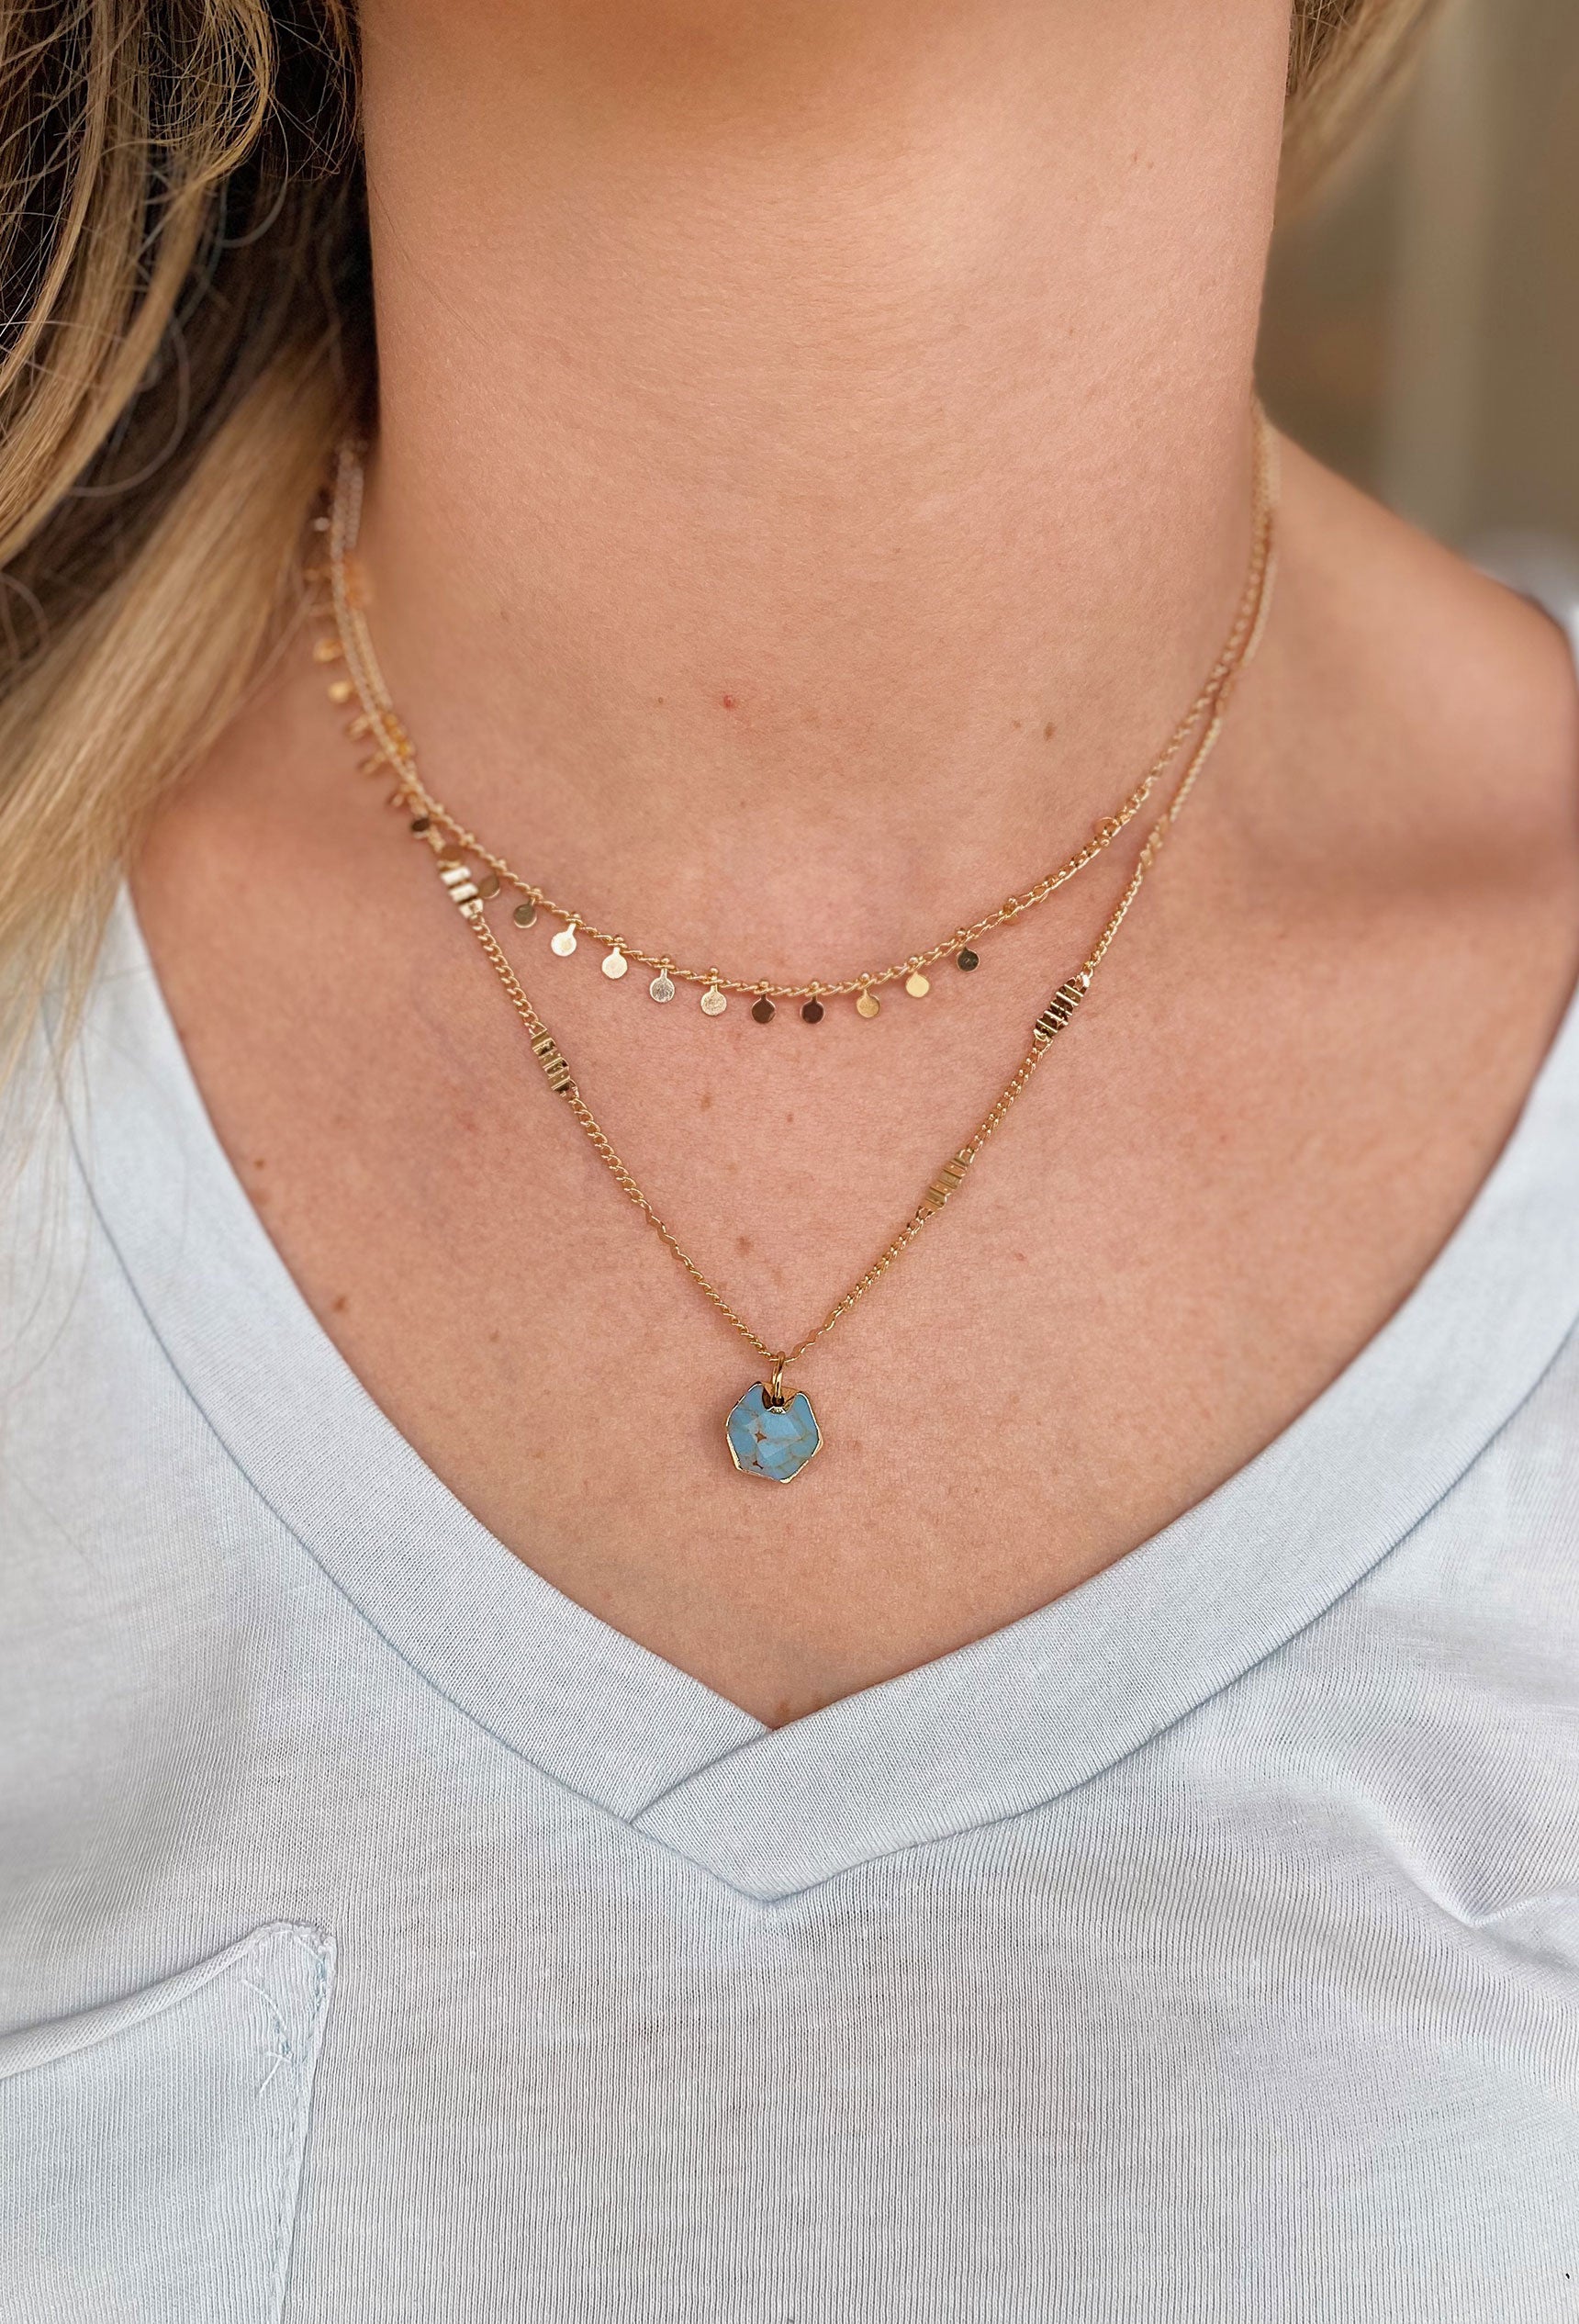 By Chance Layered Necklace, dainty gold chain featuring coin details, and a turquoise stone